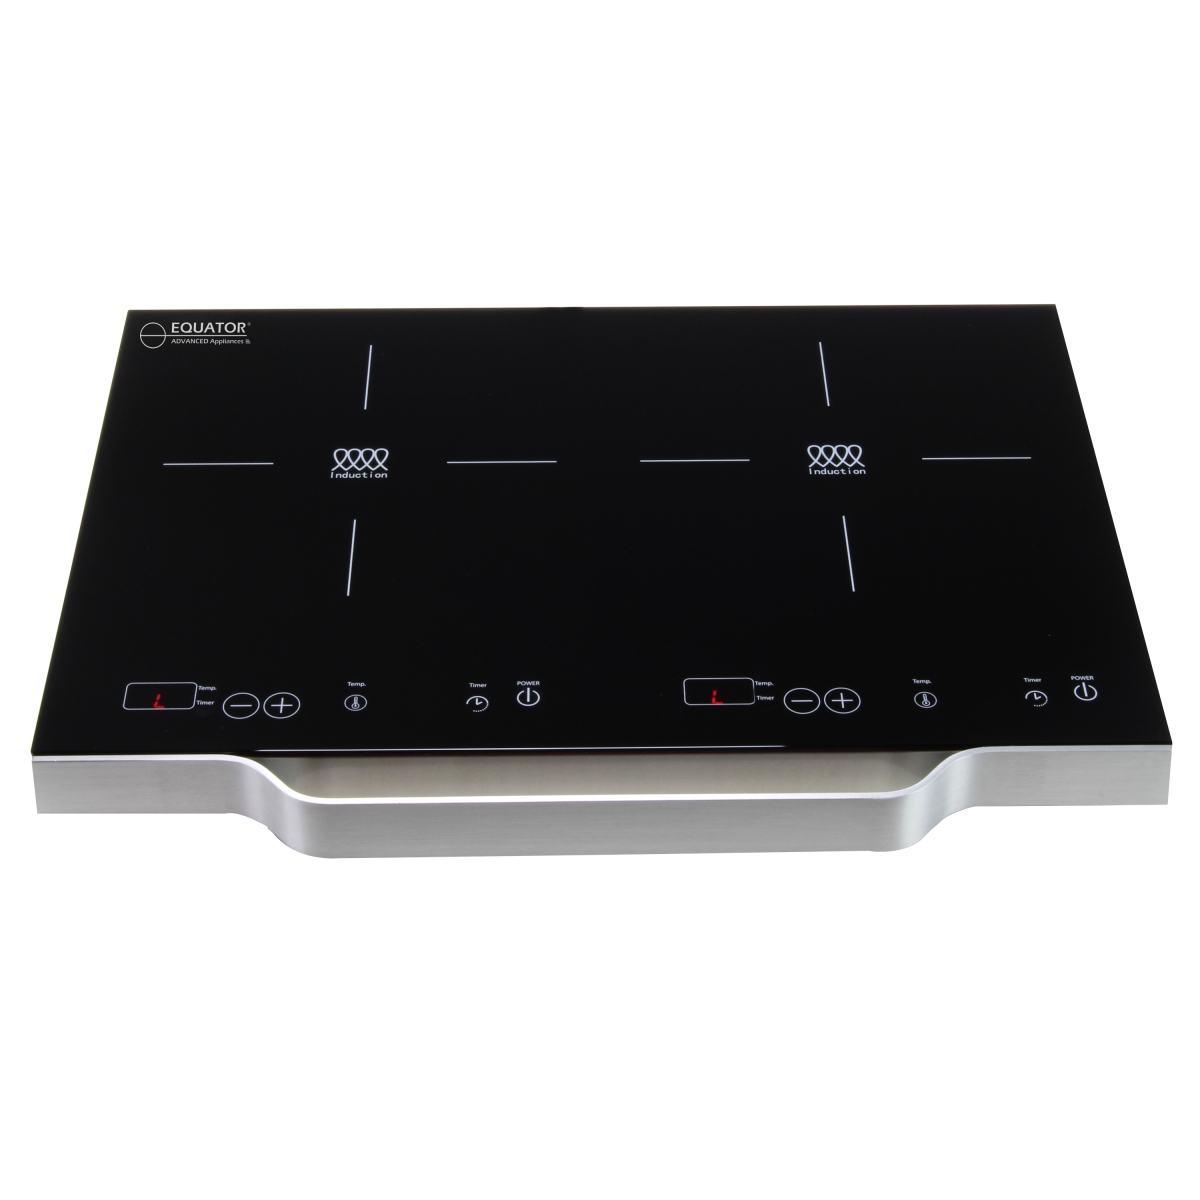 Picture of Equator Advanced Appliances PIC 200 Portable Induction Cooktop